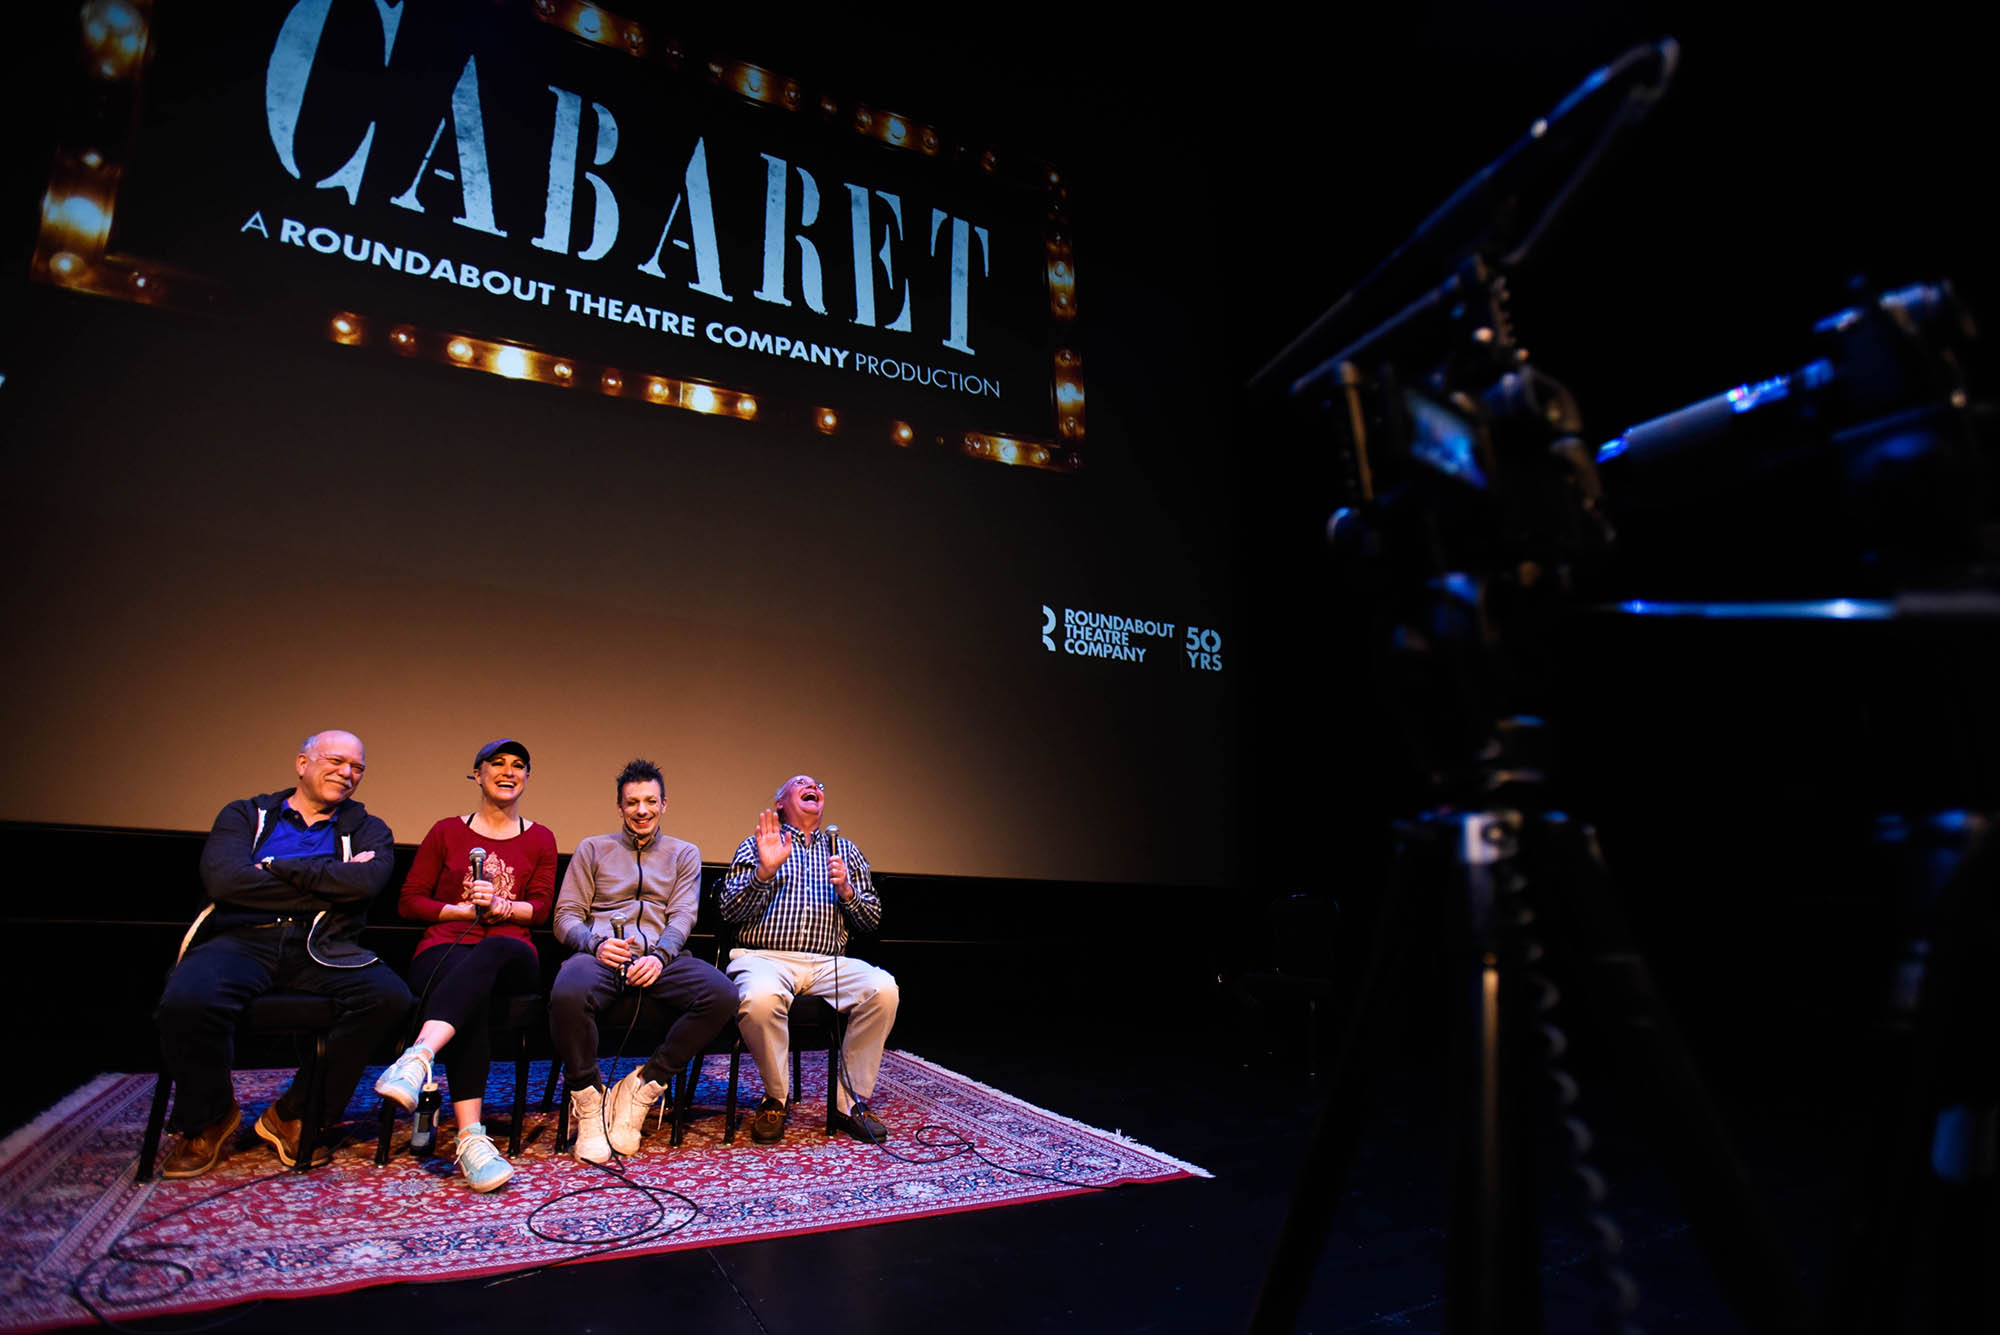 Jack Aernecke, right, interviews Cabaret cast members from left Scott Robertson as Herr Schultz, Alison Ewing as Fraülein Kost and Jon Peterson as Emcee during TheatreTalk in GE Theatre at Proctors in Schenectady Thursday, May 11, 2017. The Henry Schaffer TheatreTalk series offers pre- or post-performance arts discussions are an opprotunity for audience members to engage with artists in a more intimate setting.